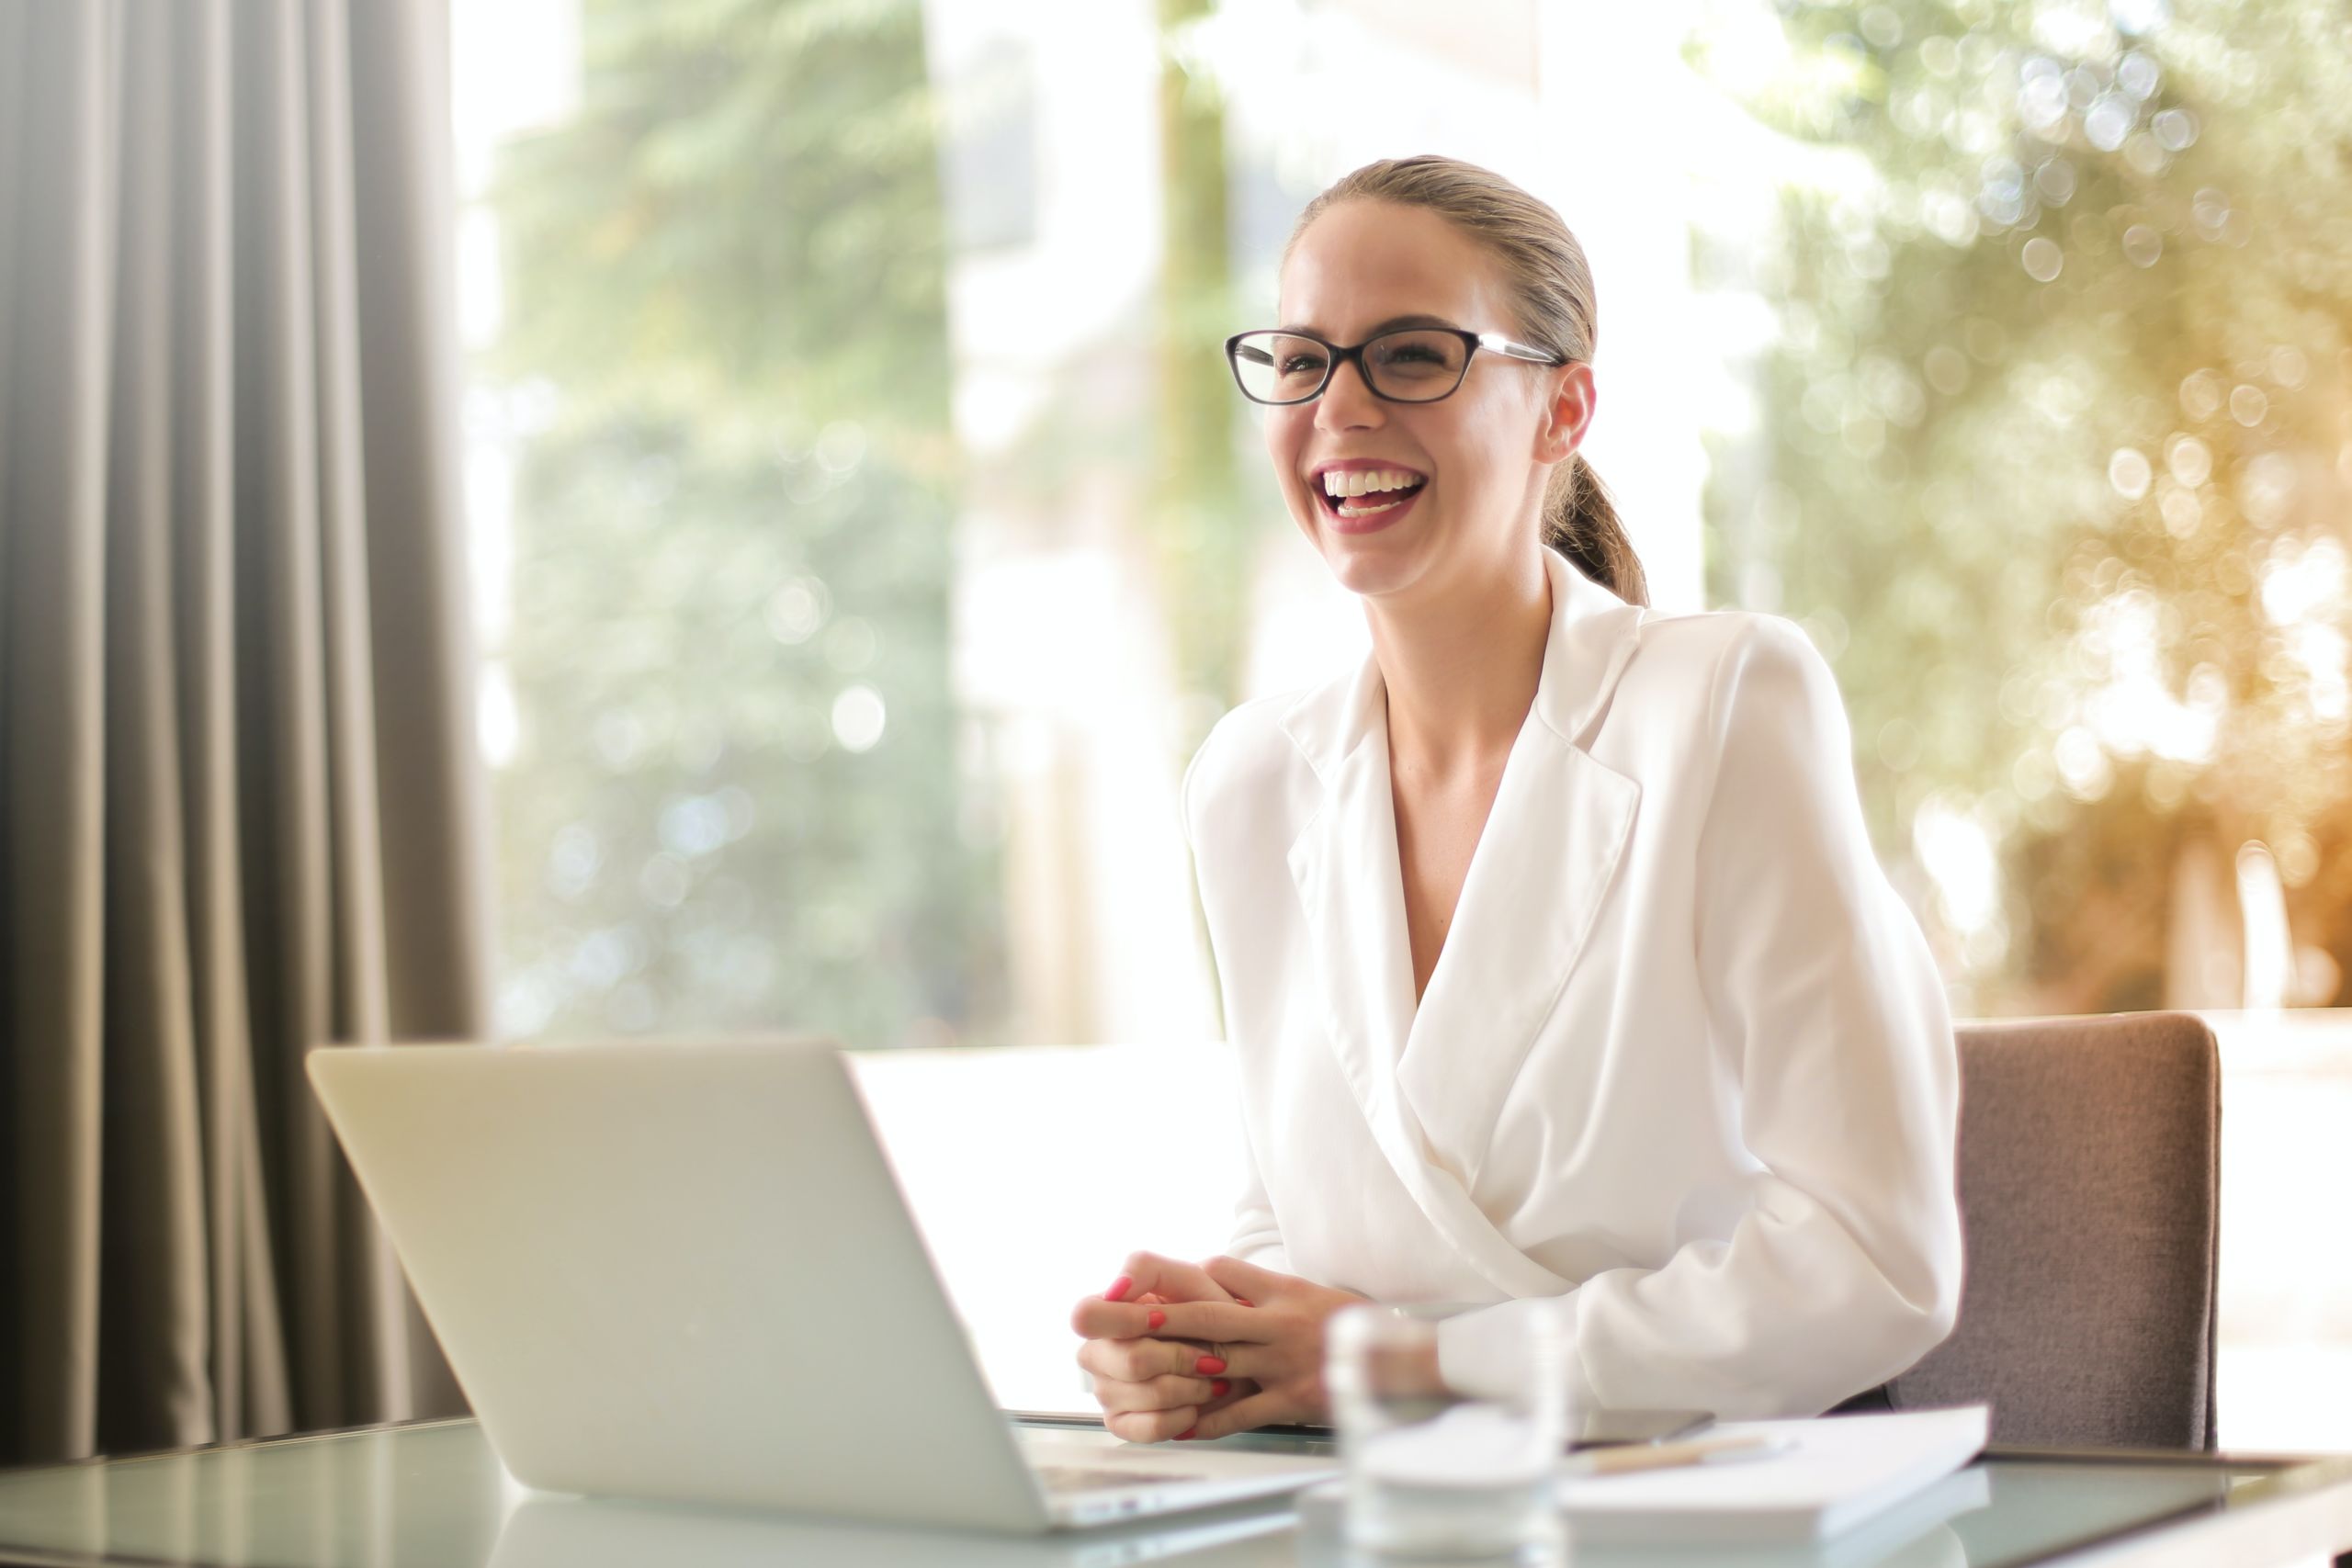 A great recruiter can significantly improve your hiring process. Blonde woman with glasses sits at a desk with a laptop and smiles.